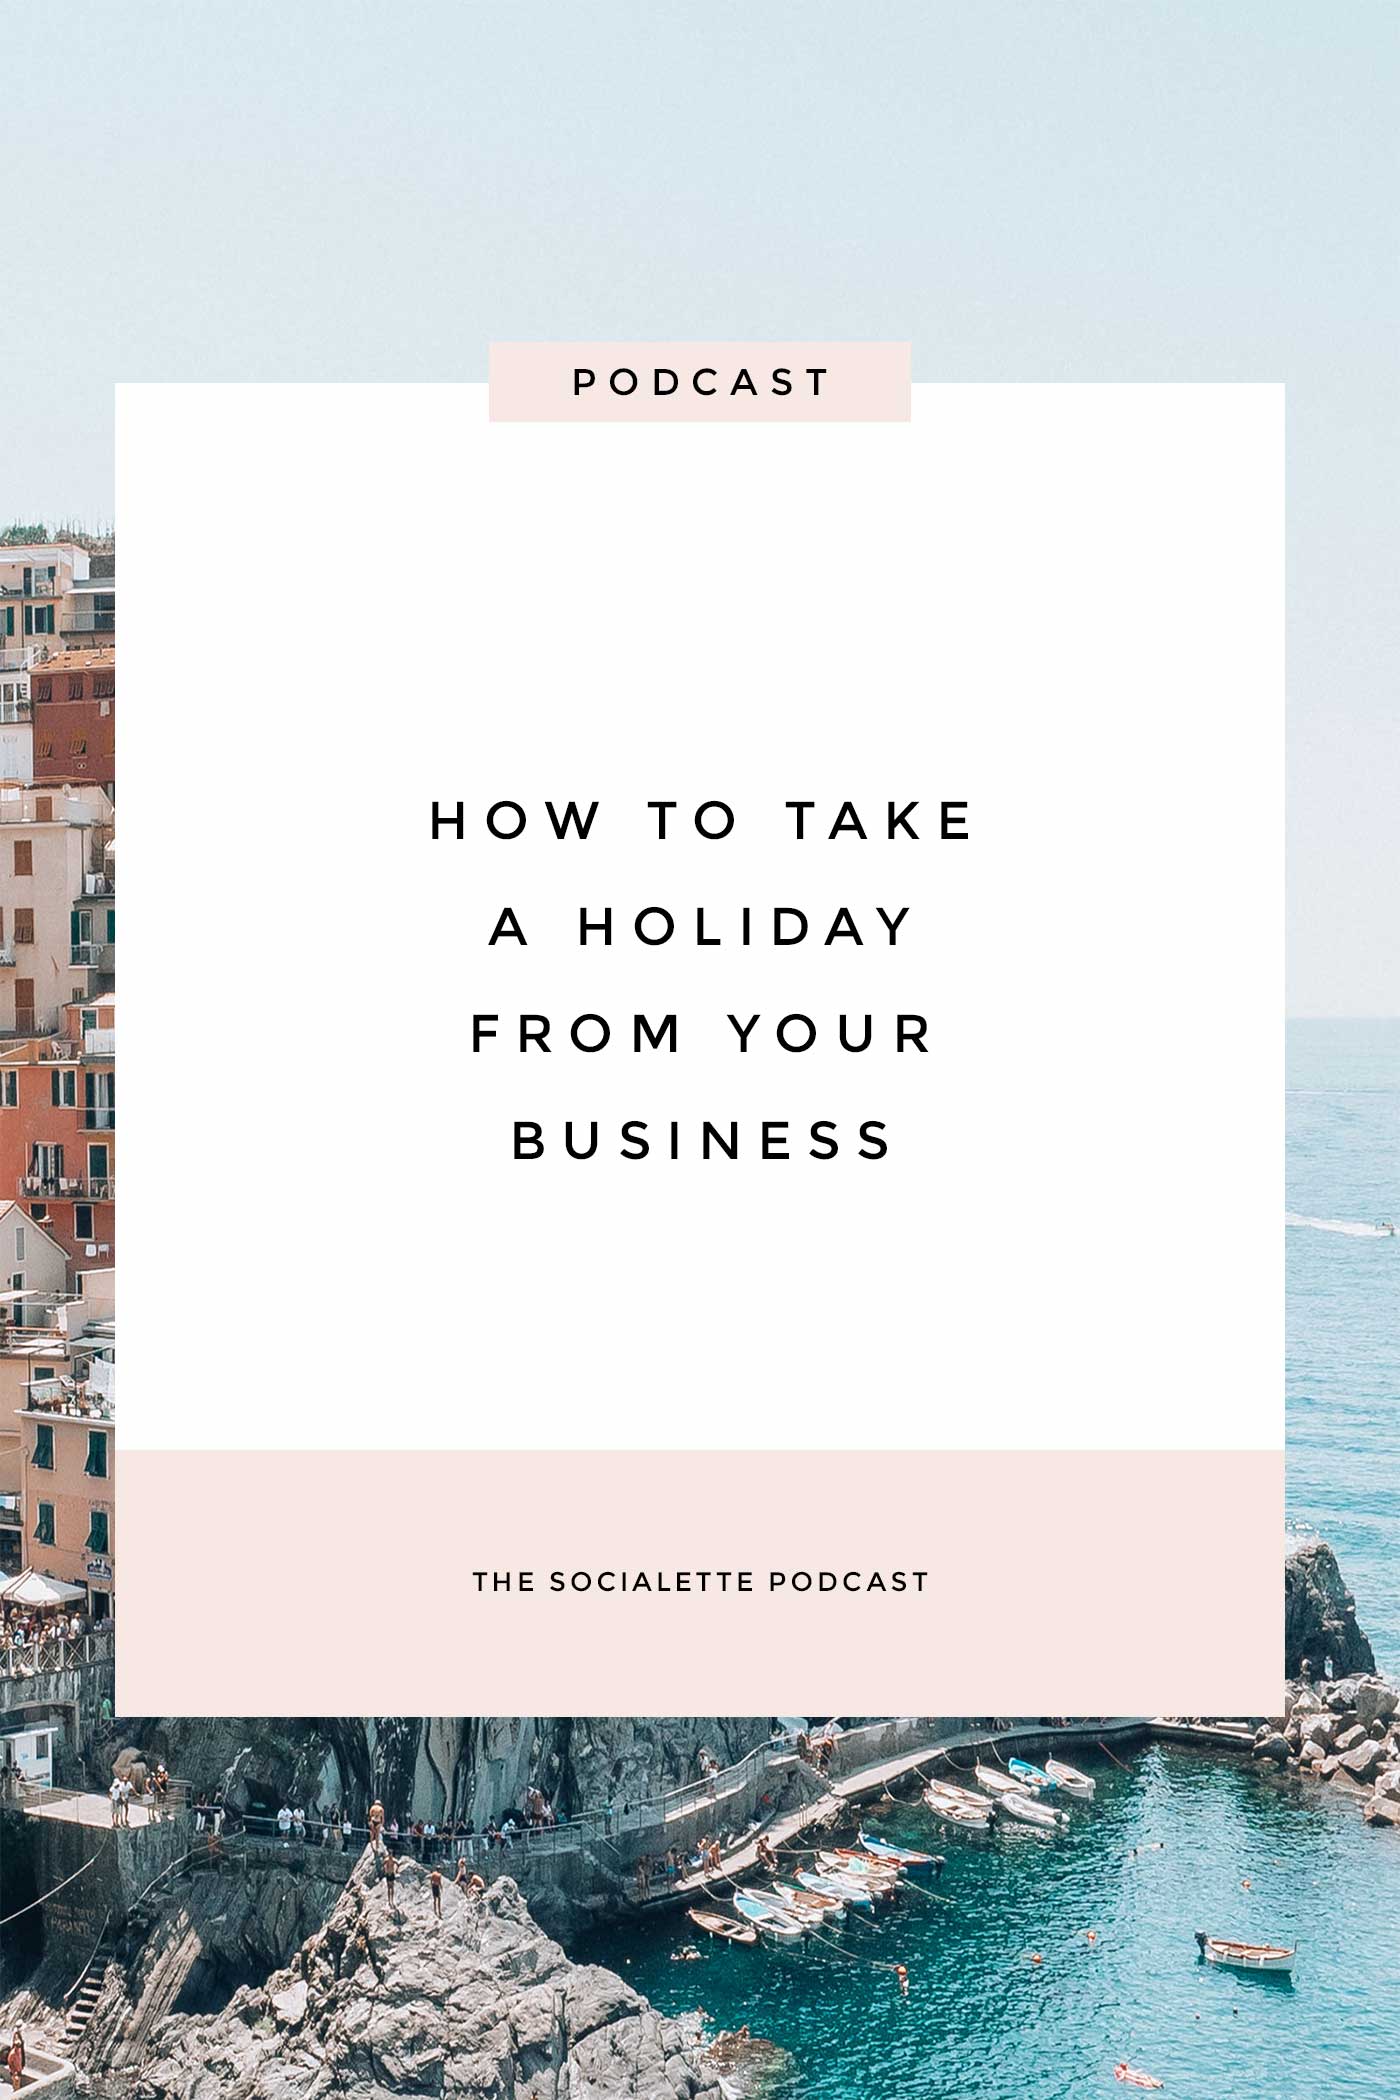 How to take holiday from business